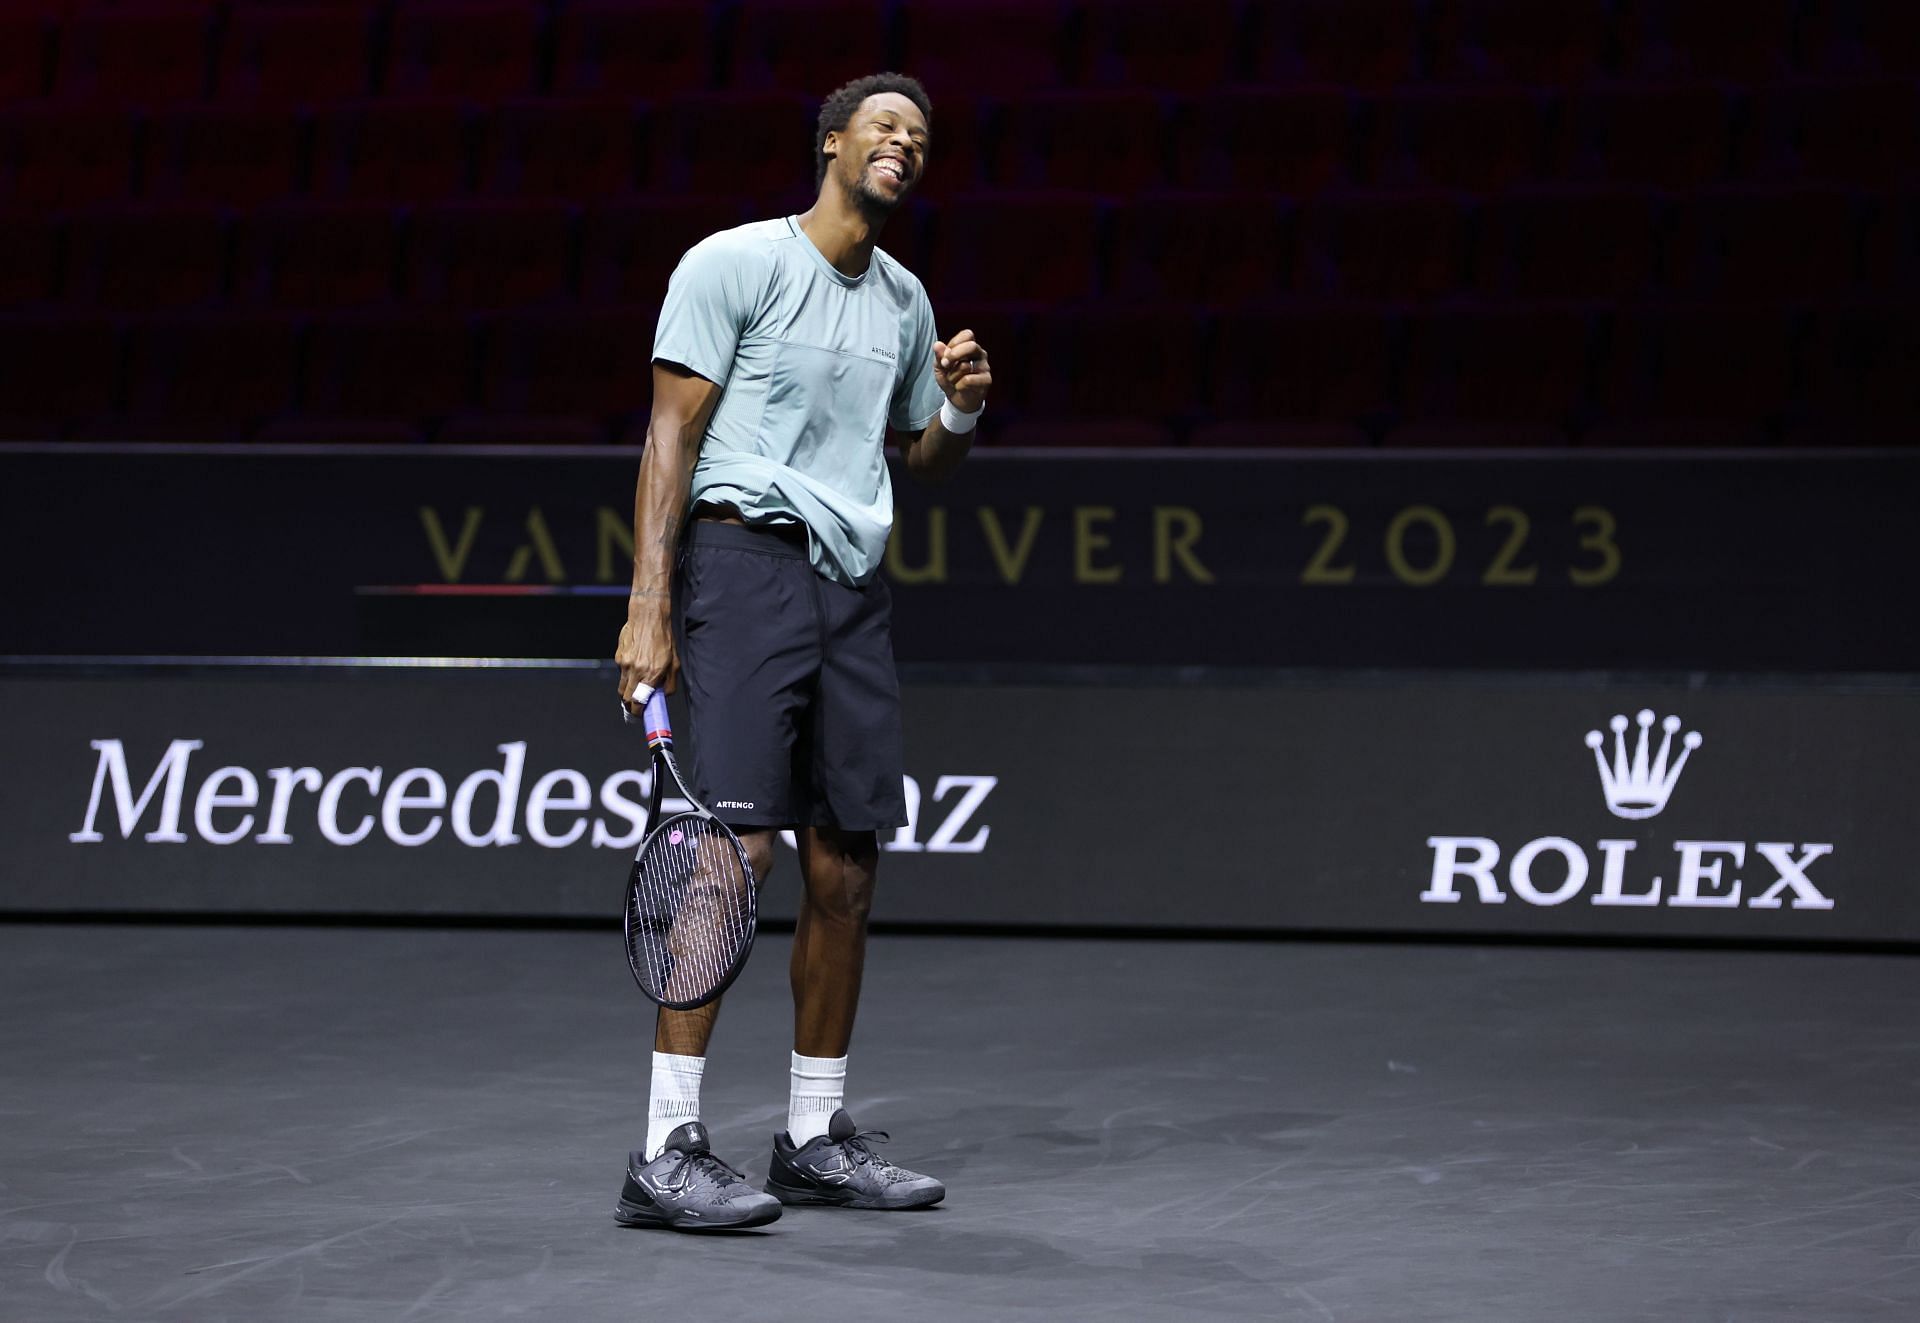 Gael Monfils at the 2023 Laver Cup 2023